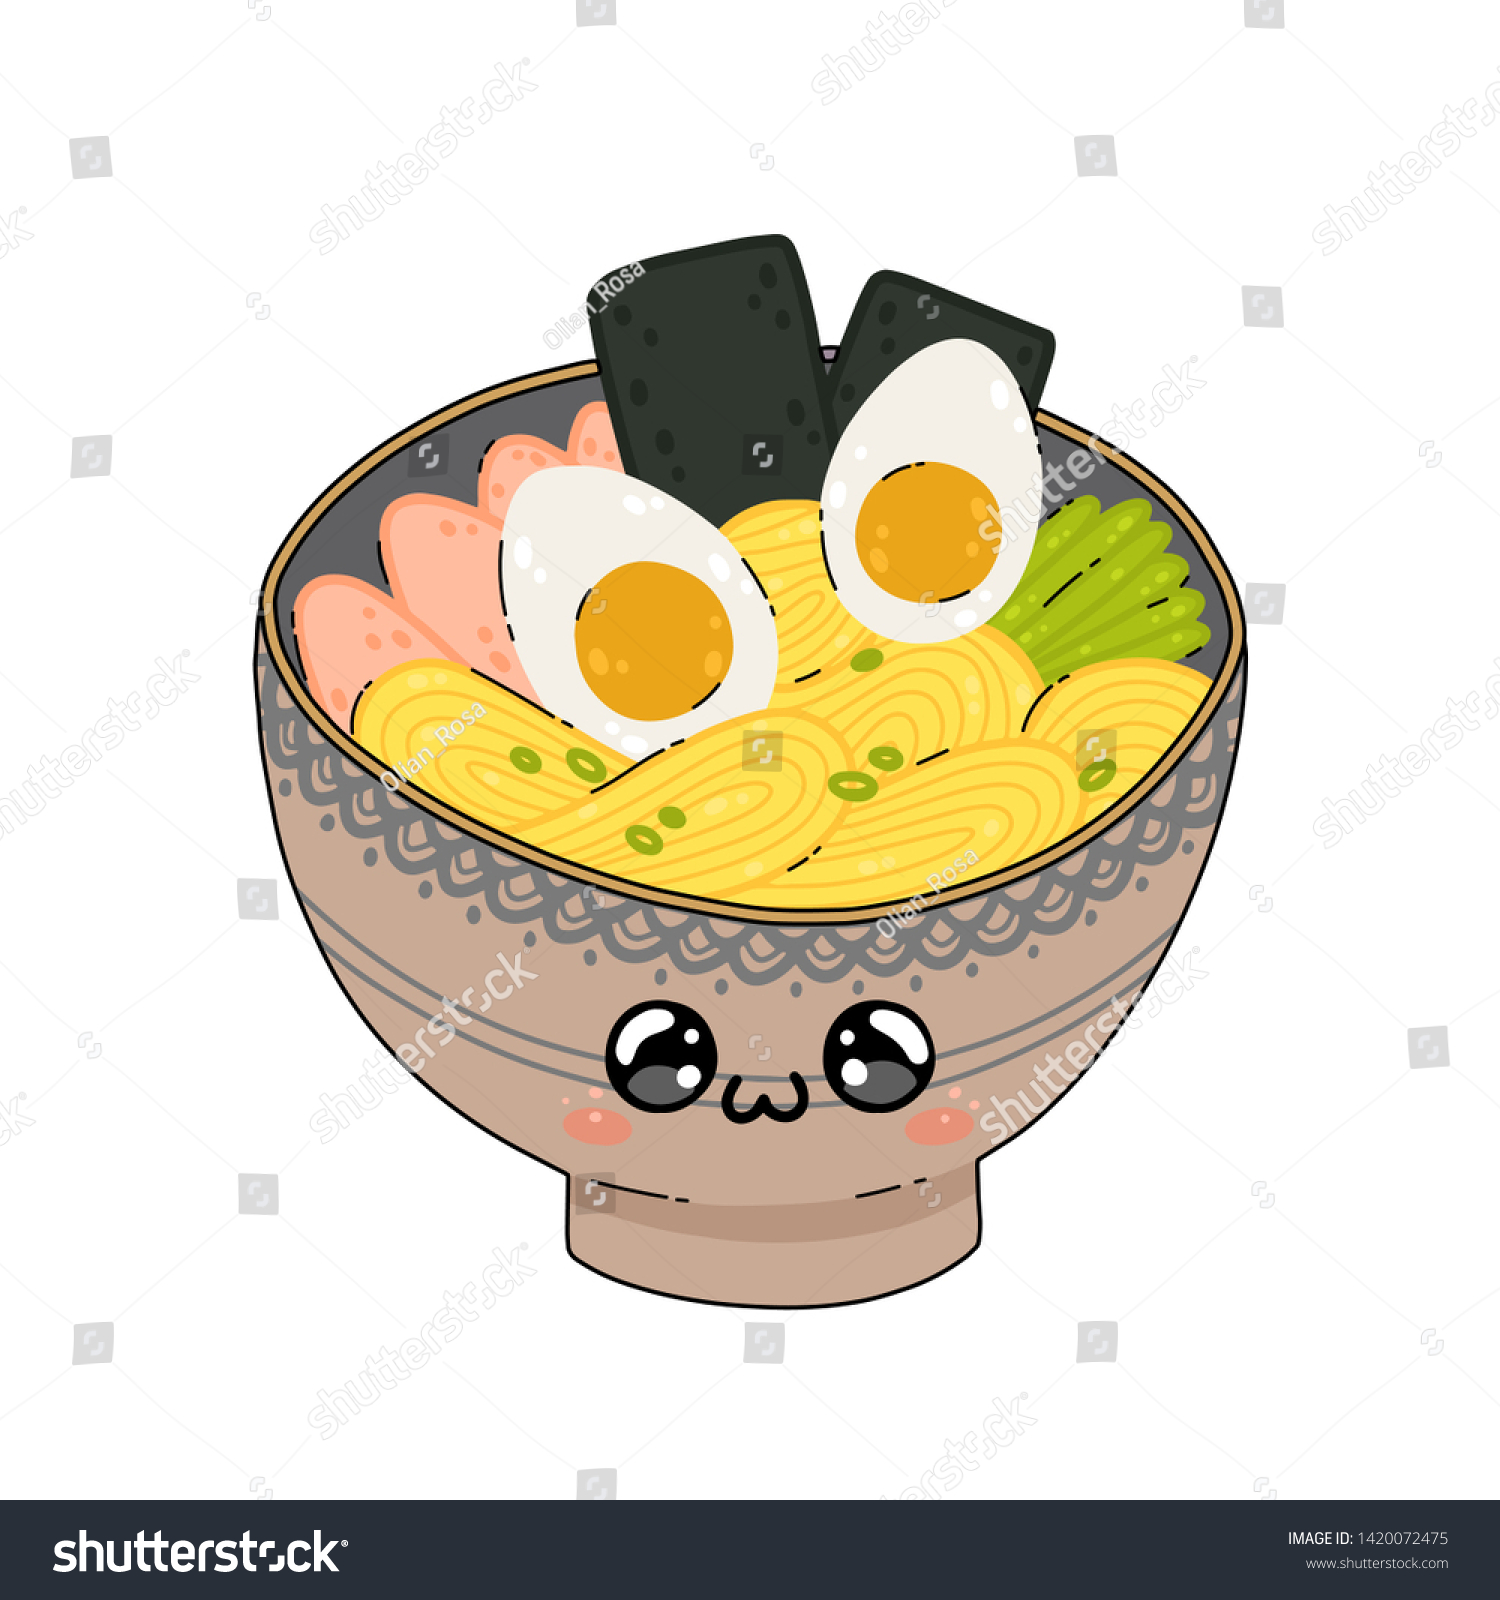 Multicolor 18x18 Japanese Bowl Noodle Soup Kawaii Waifu Anime Ramen Makes Me Feel Cook Dishes Foodie Cuisine Throw Pillow 